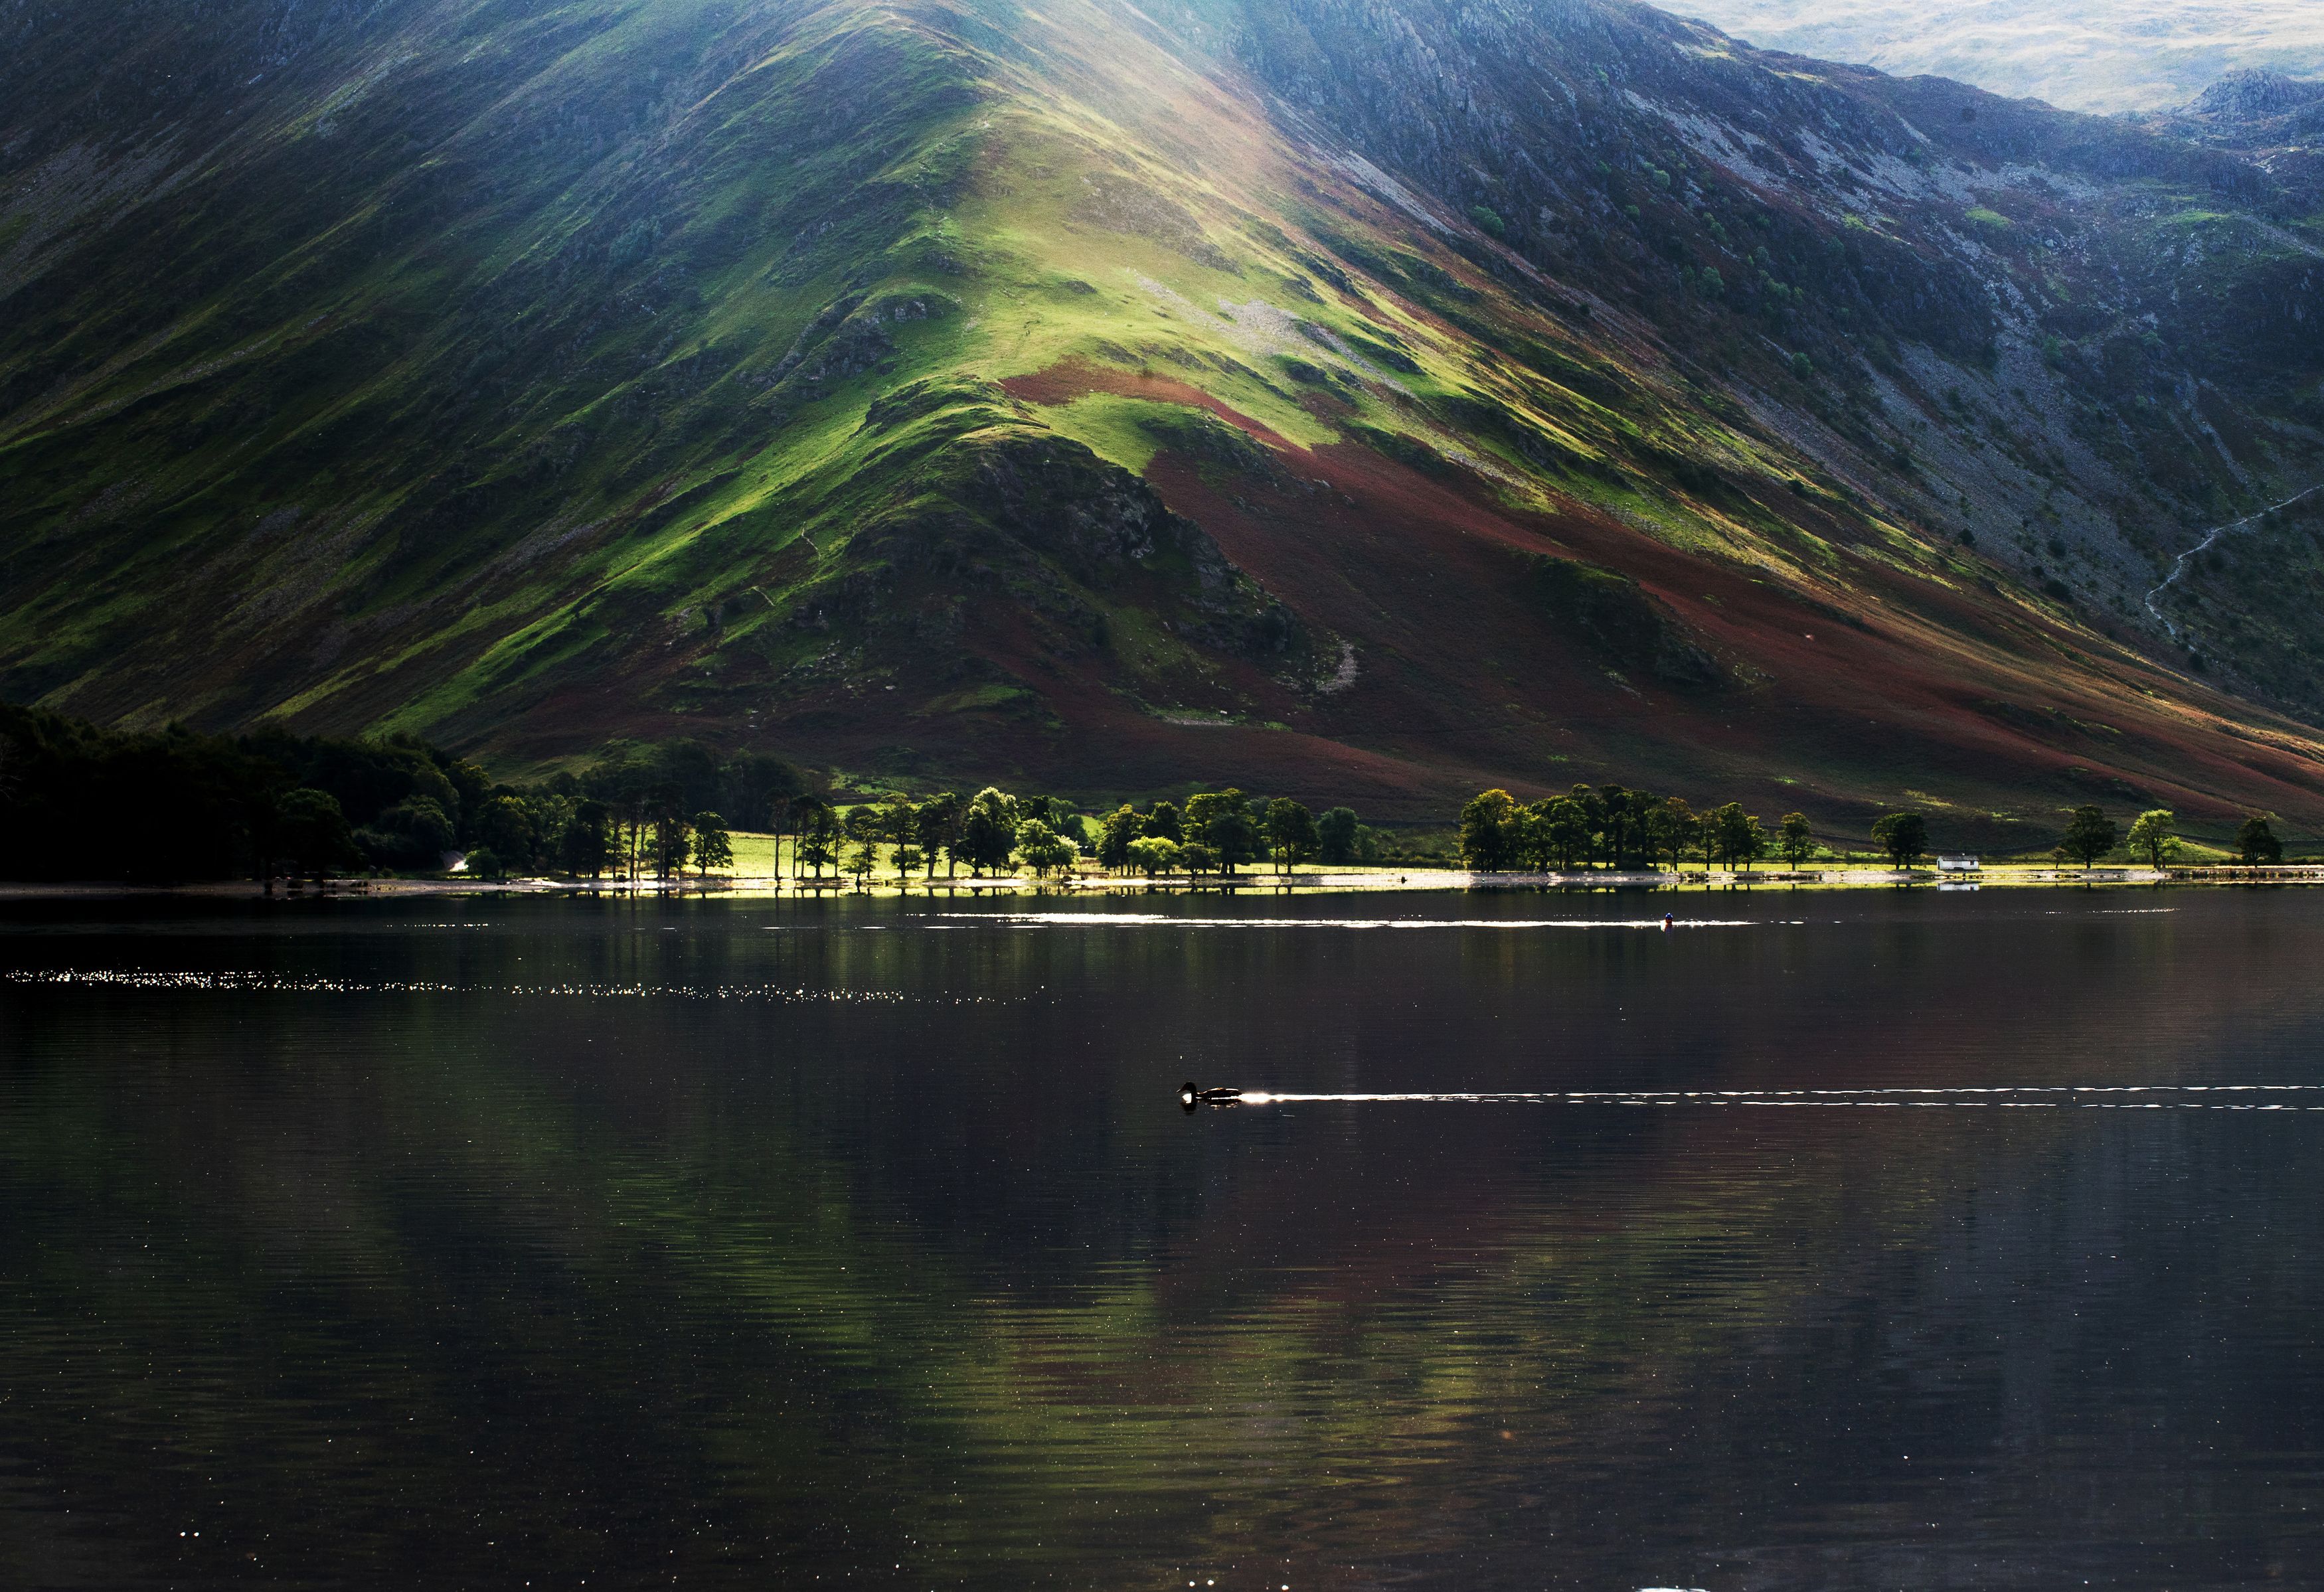 A general view of Buttermere in the Lake District